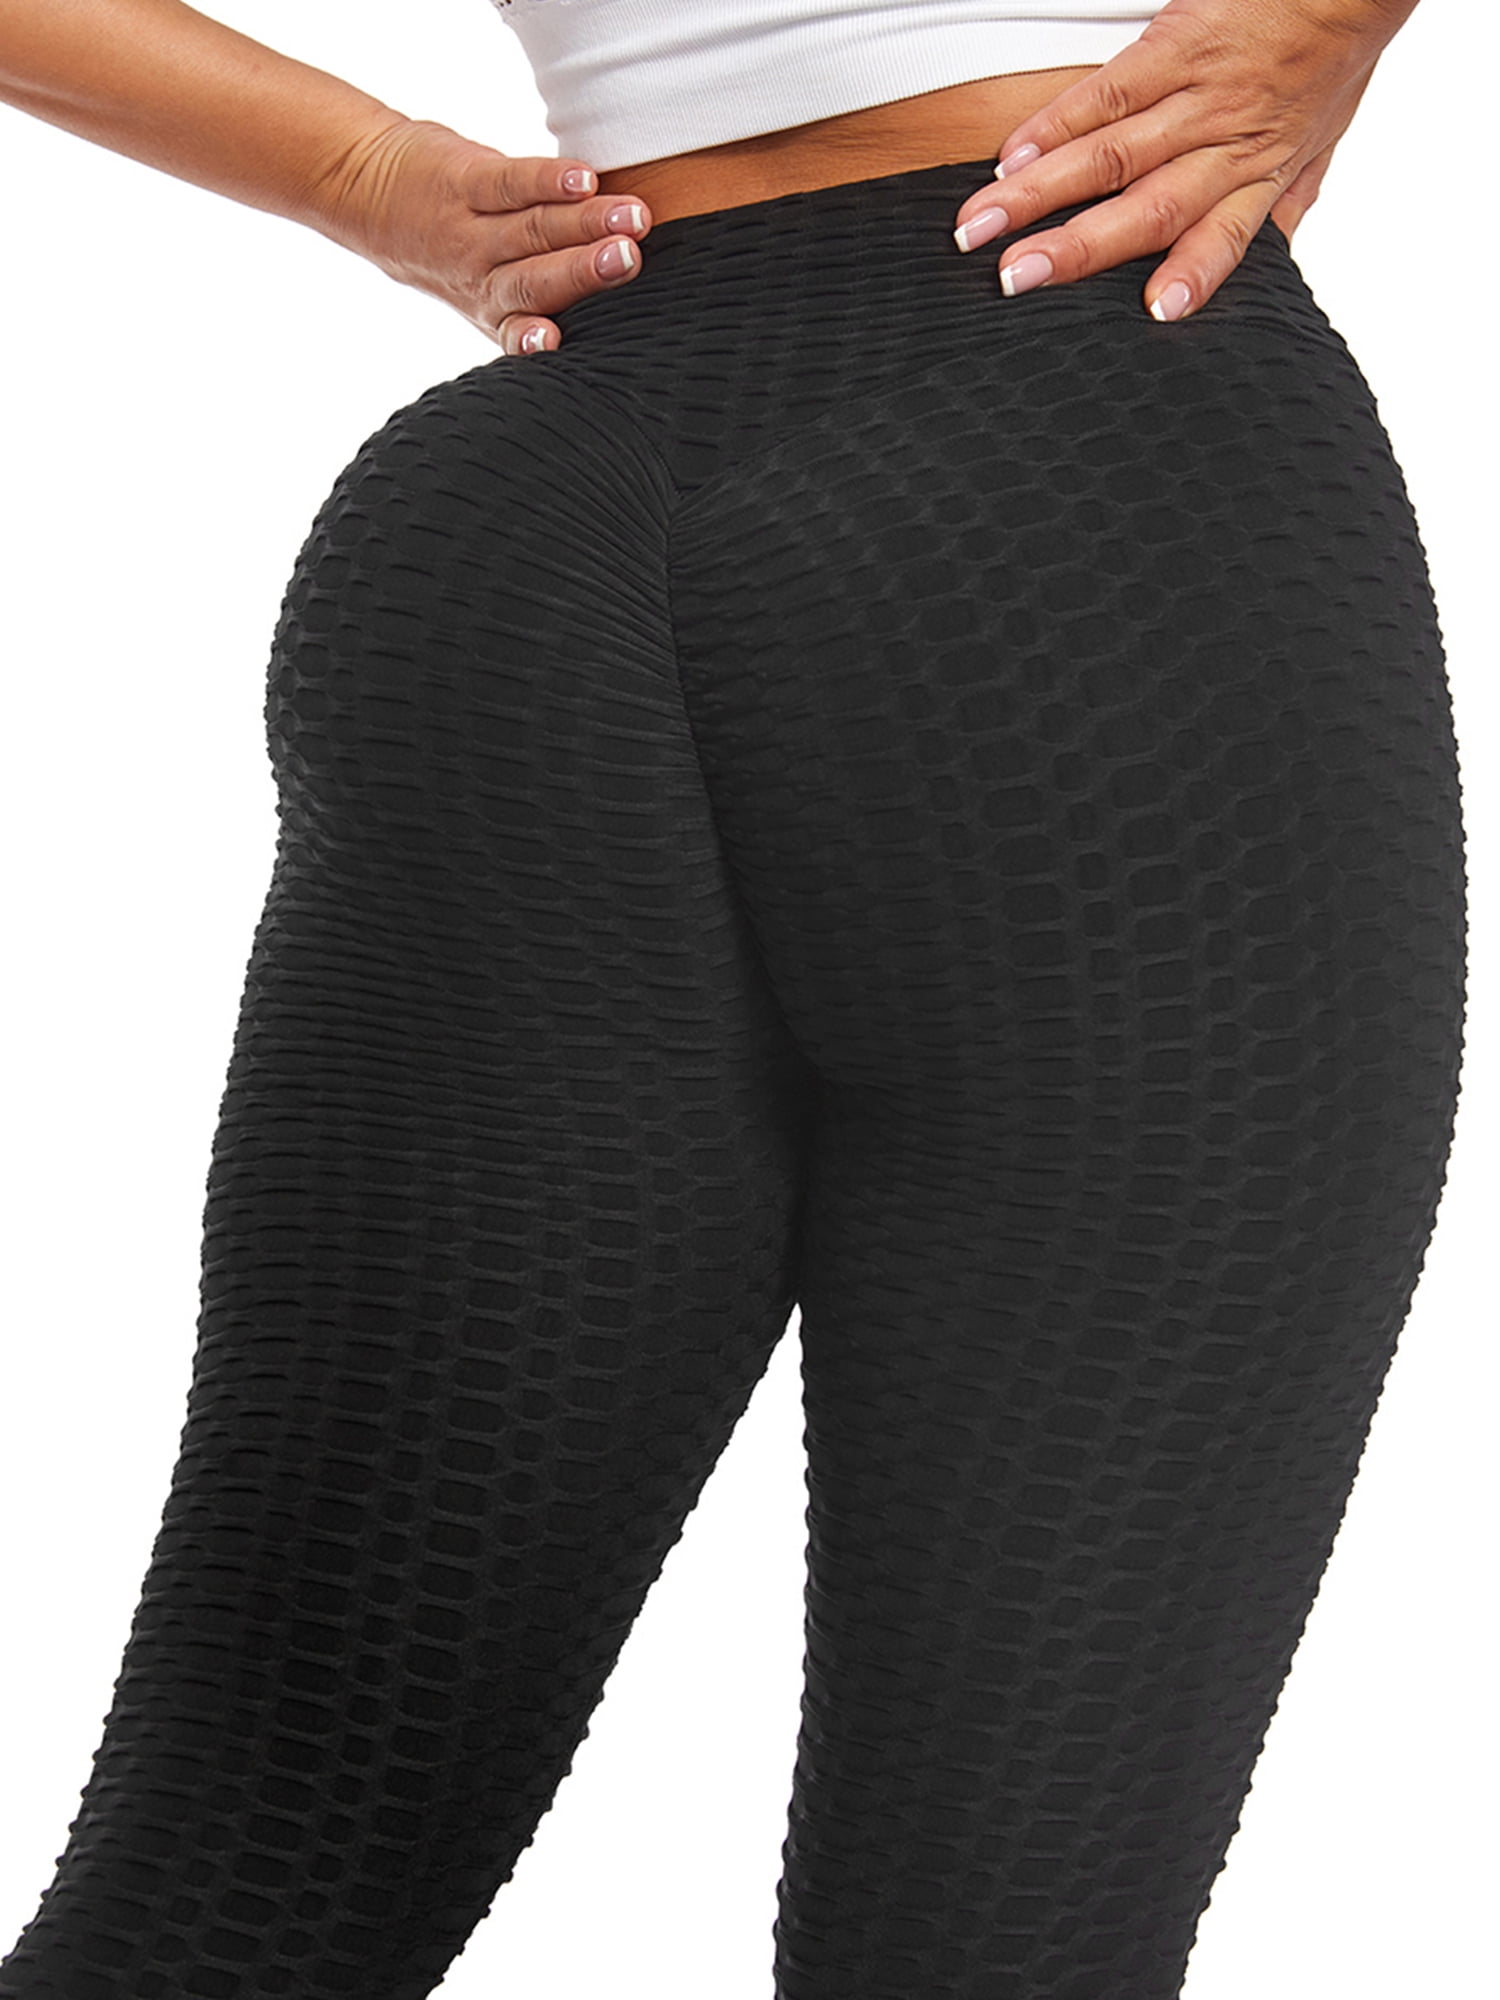 FUTATA Black Leggings For Women High Waist Yoga Pants Butt Lift Workout  Sweatpants Tummy Control Compression Full Length Tight Pants For Gym,  Running, Dancing, Cycling 